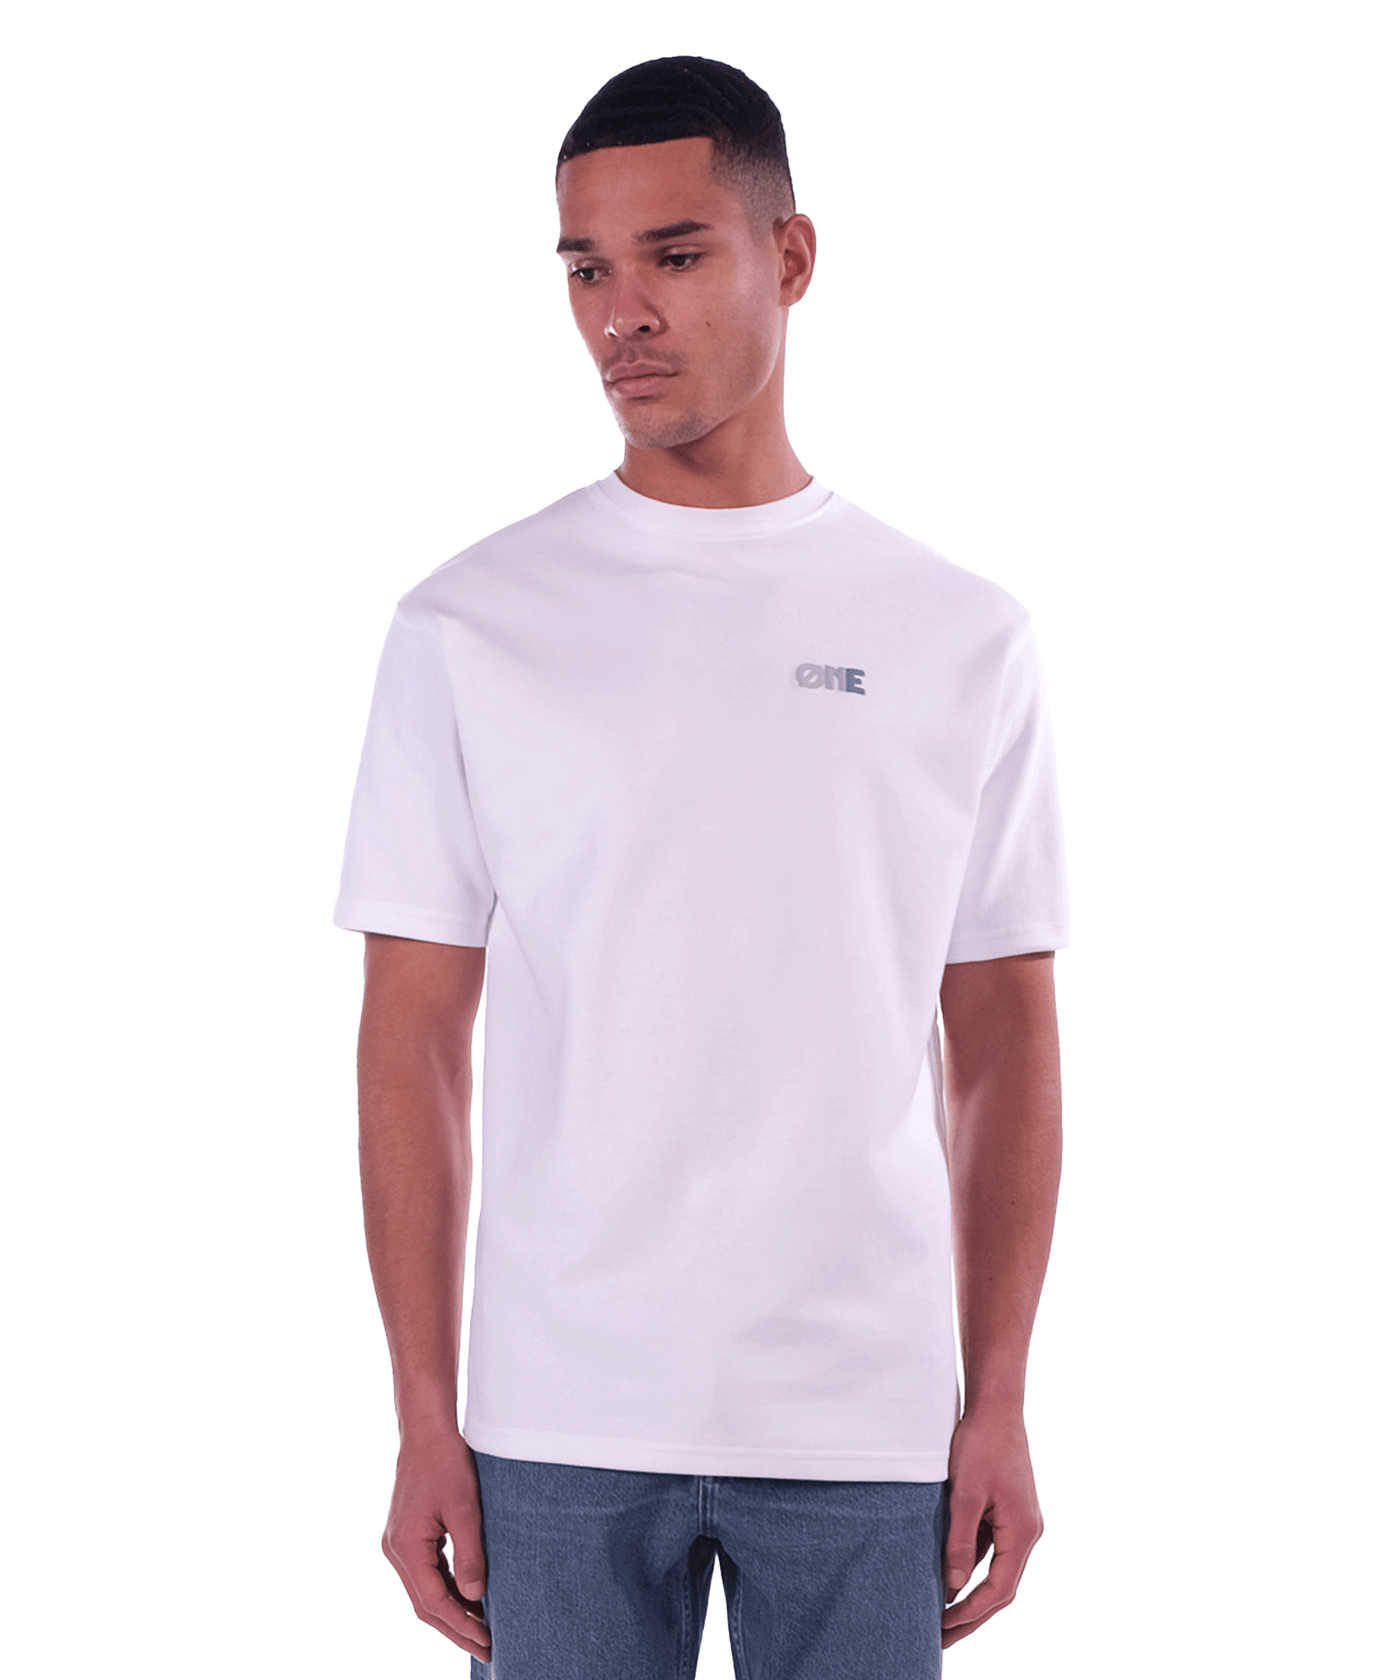 One First Movers - Puff Logo Front - T-shirt - White